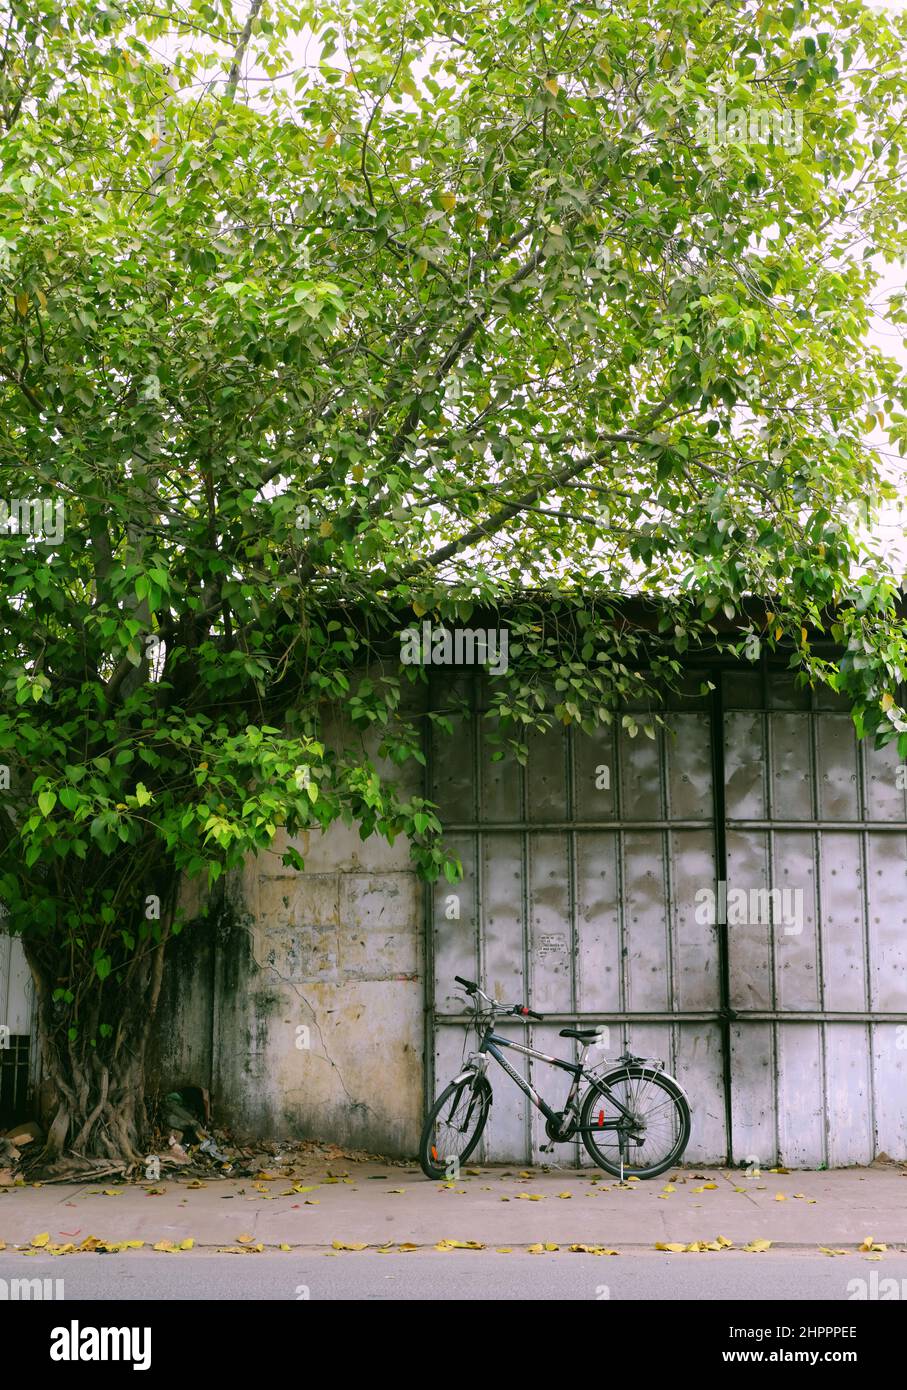 Landscape street life at Ho Chi Minh city, bike at wall under large tree trunk with green leaf, bicycle is transport that environmentally friendly Stock Photo